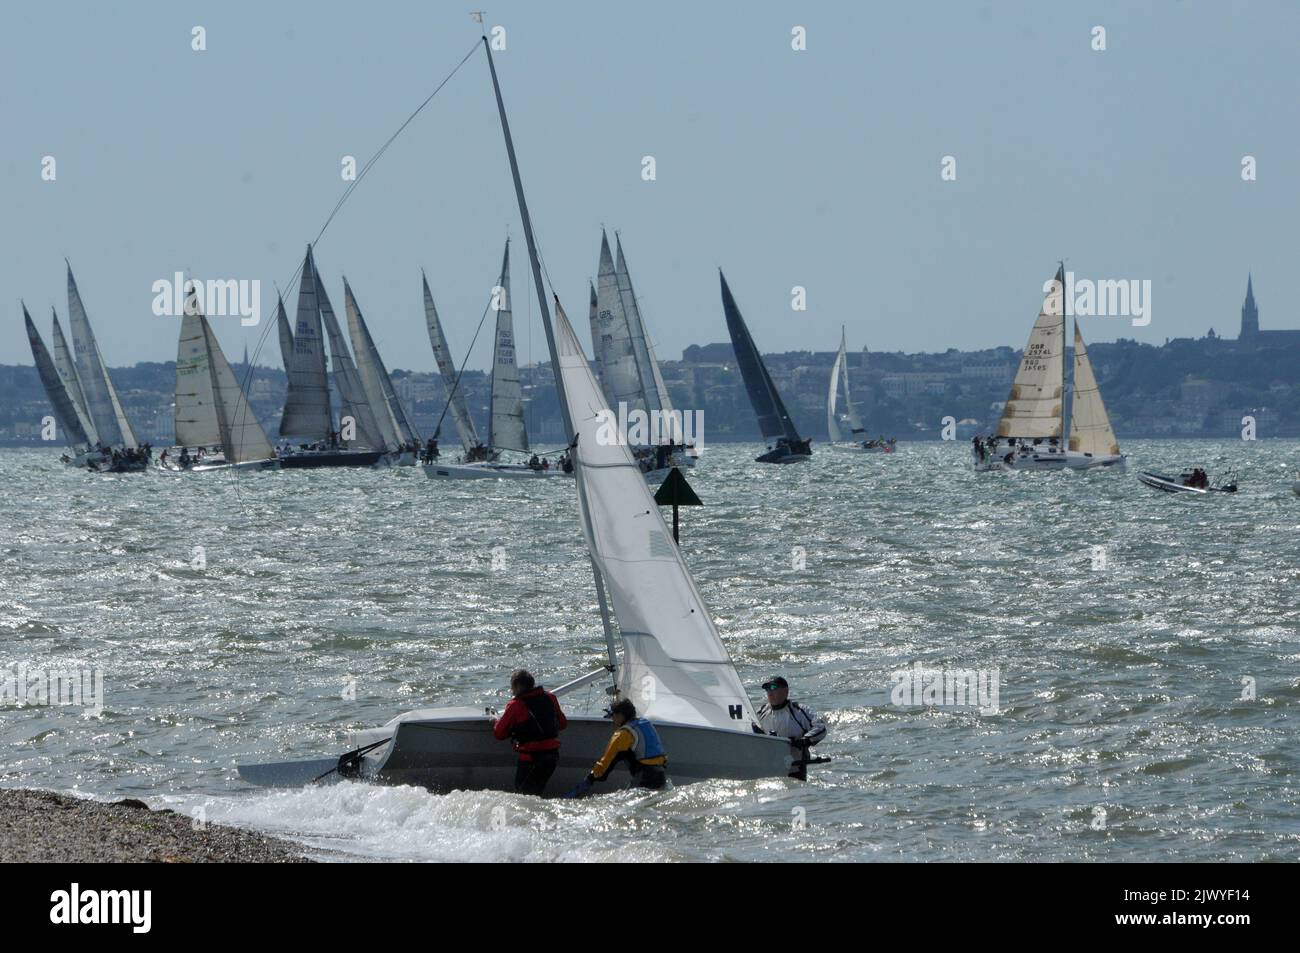 DINGHY SAILORS BEACH THEIR YACHT AS THE BIG BOYS TAKING PART IN COWES WEEK  BATTLE FOR POSITION CLOSE TO THE SHORE AT LEE ON THE SOLENT, HAMPSHIRE. PIC MIKE WALKER, MIKE WALKER PICTURES 2013 Stock Photo